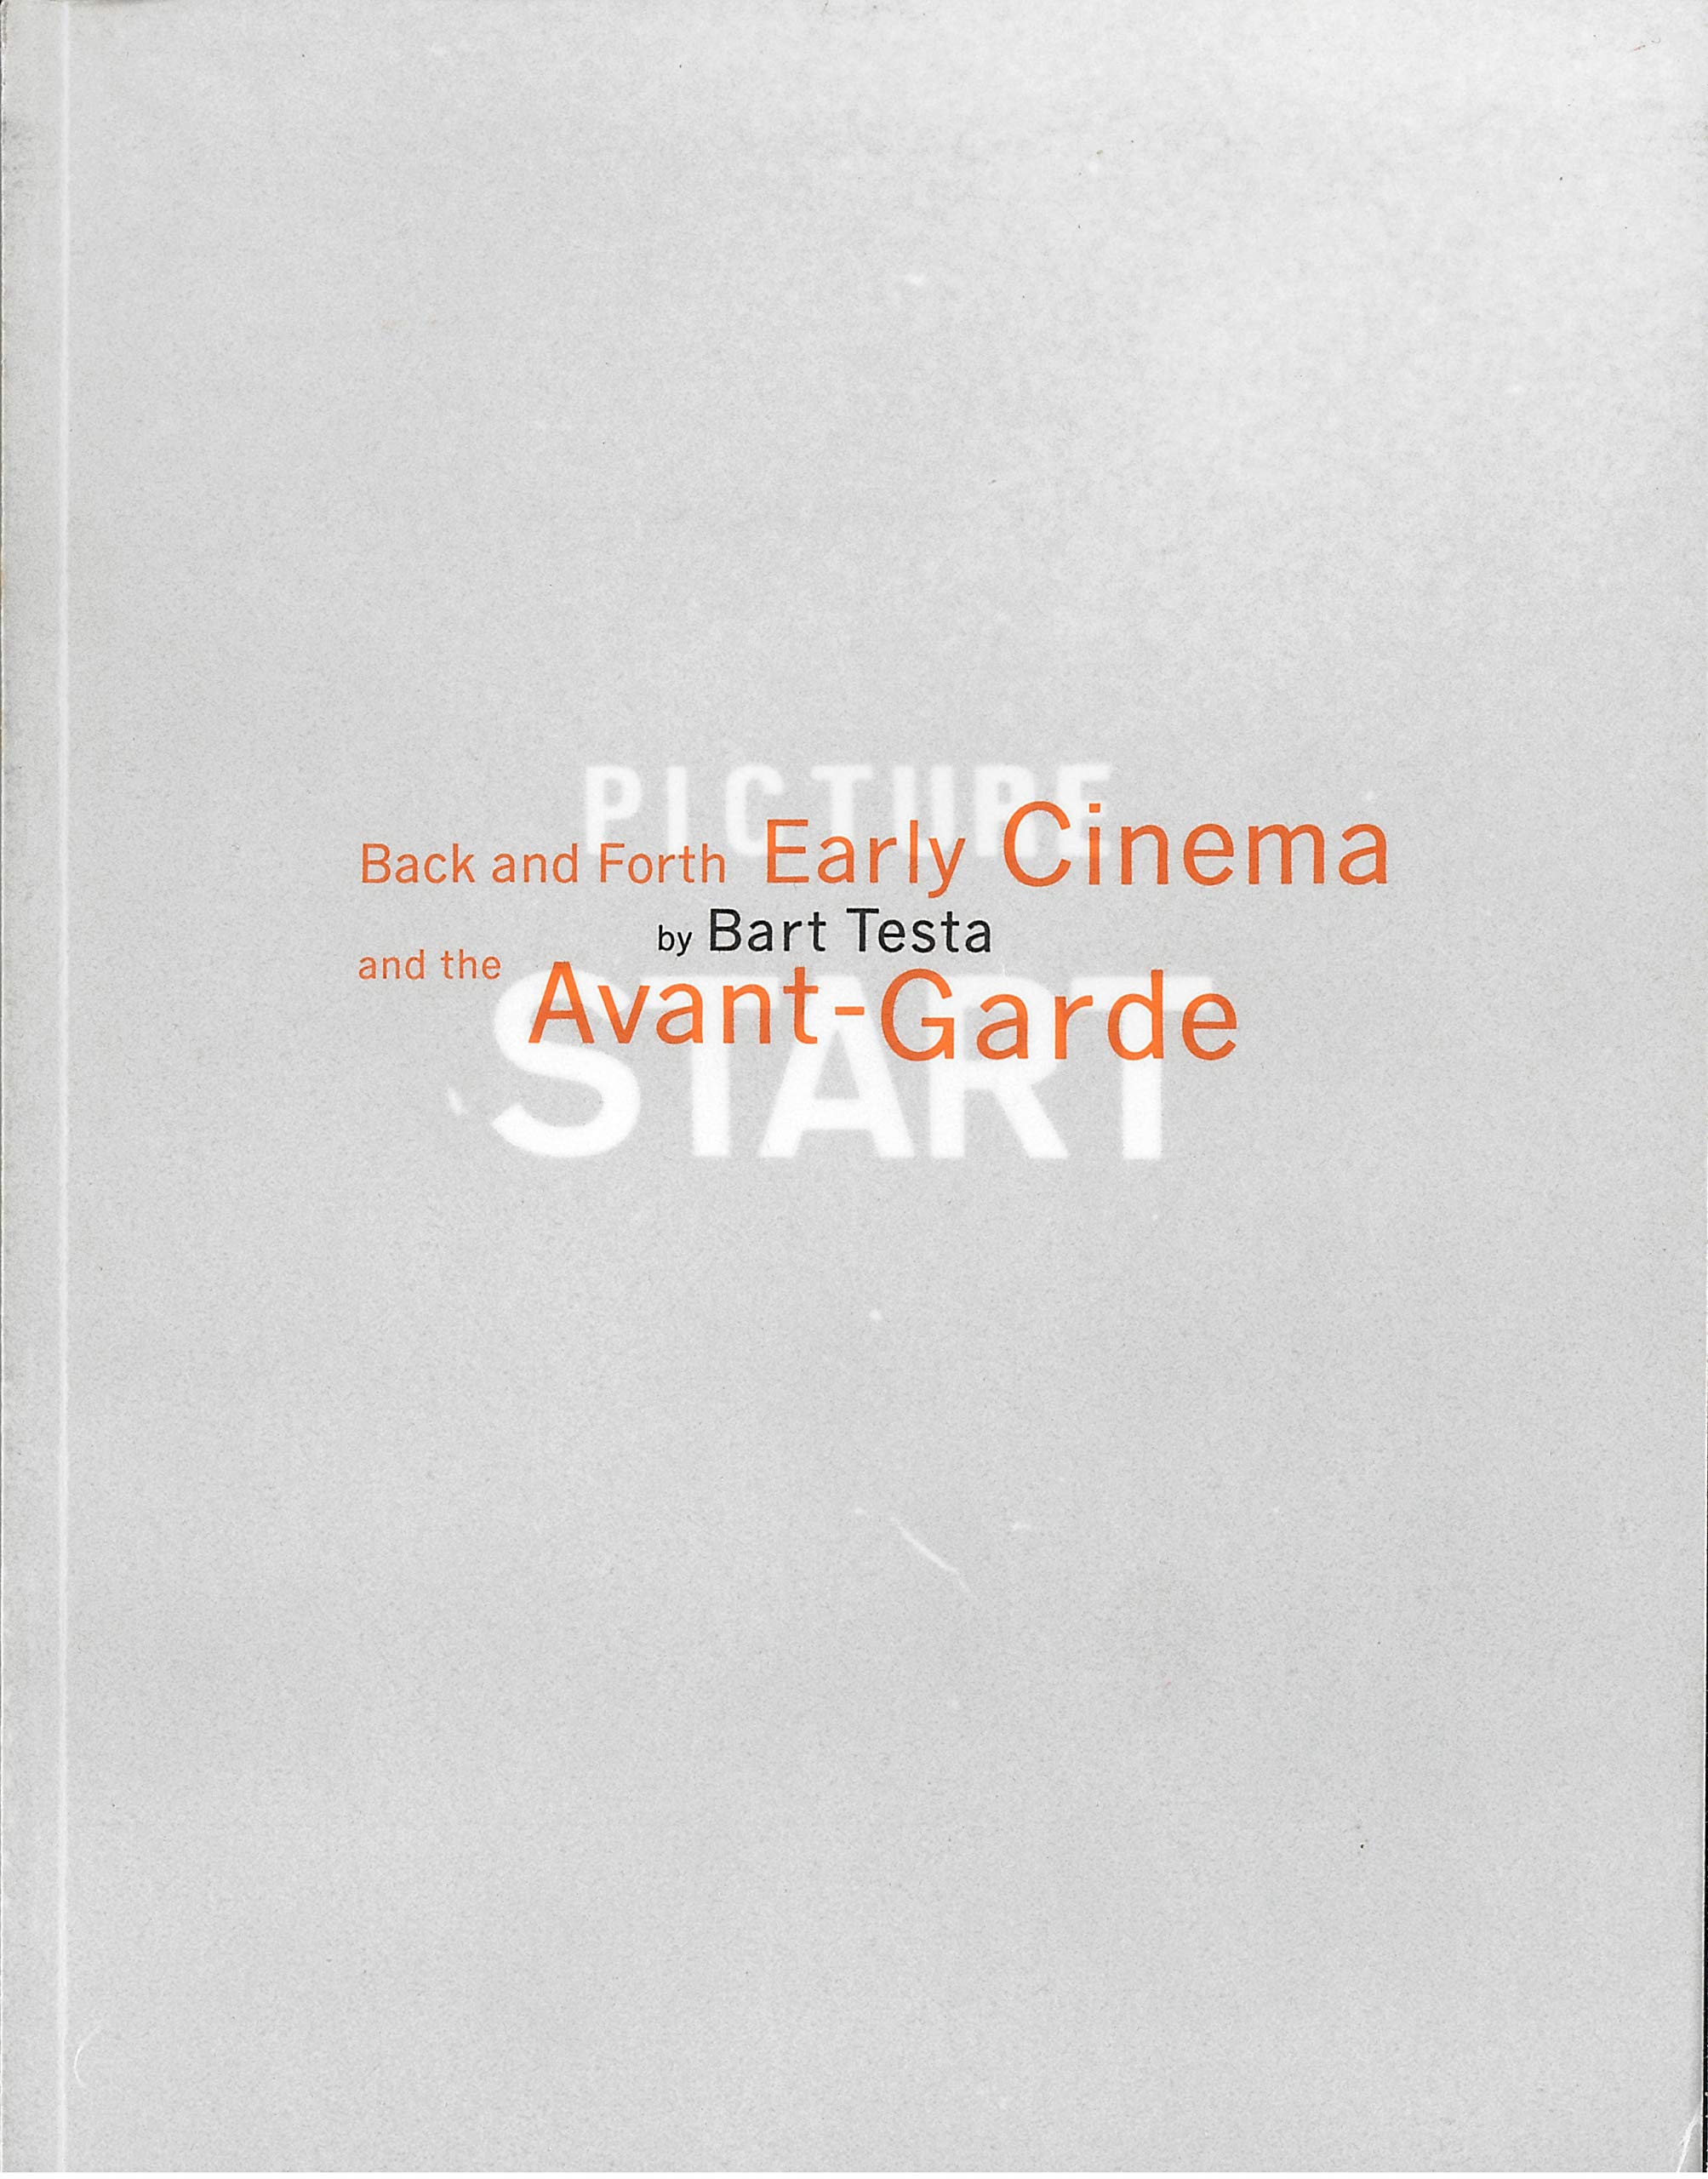 Back and Forth: Early Cinema and the Avant-Garde